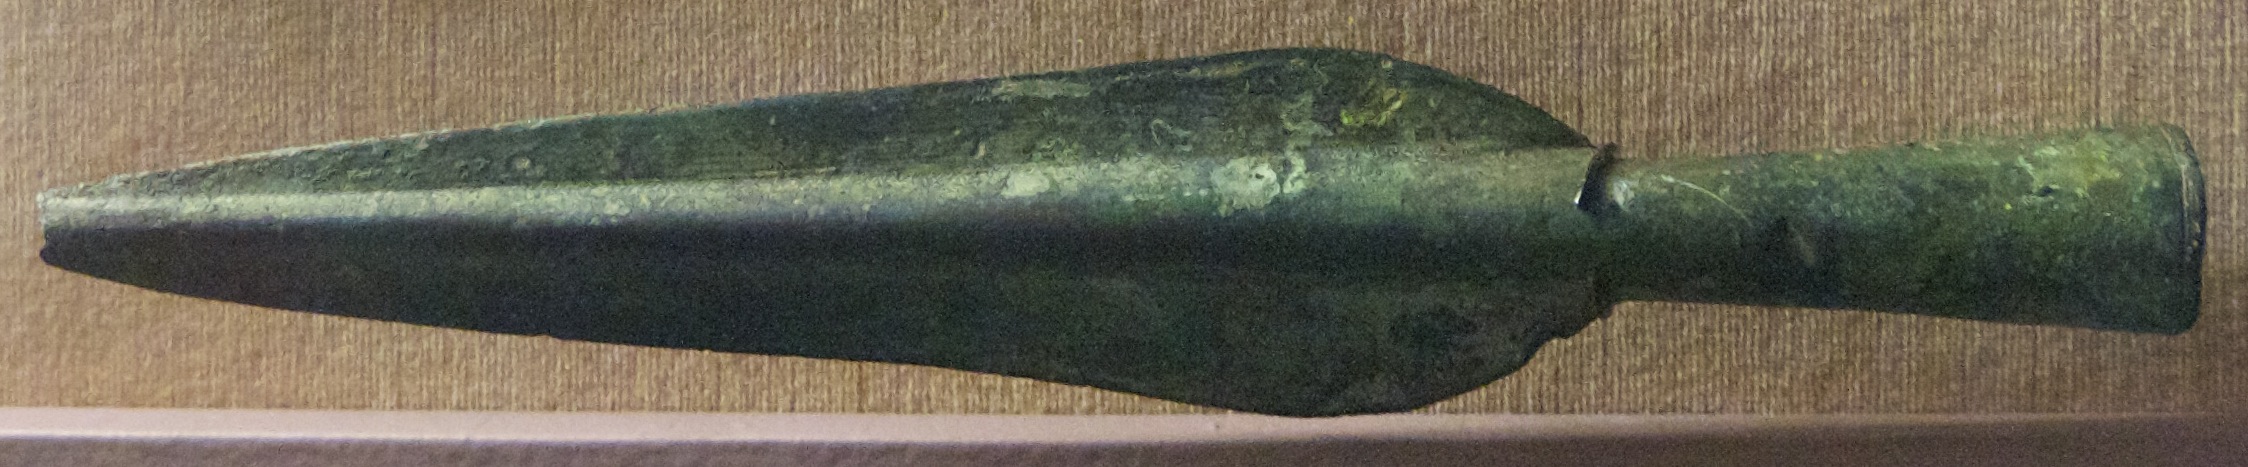 Egyptian bronze spear from Banha, 2nd millennium BC